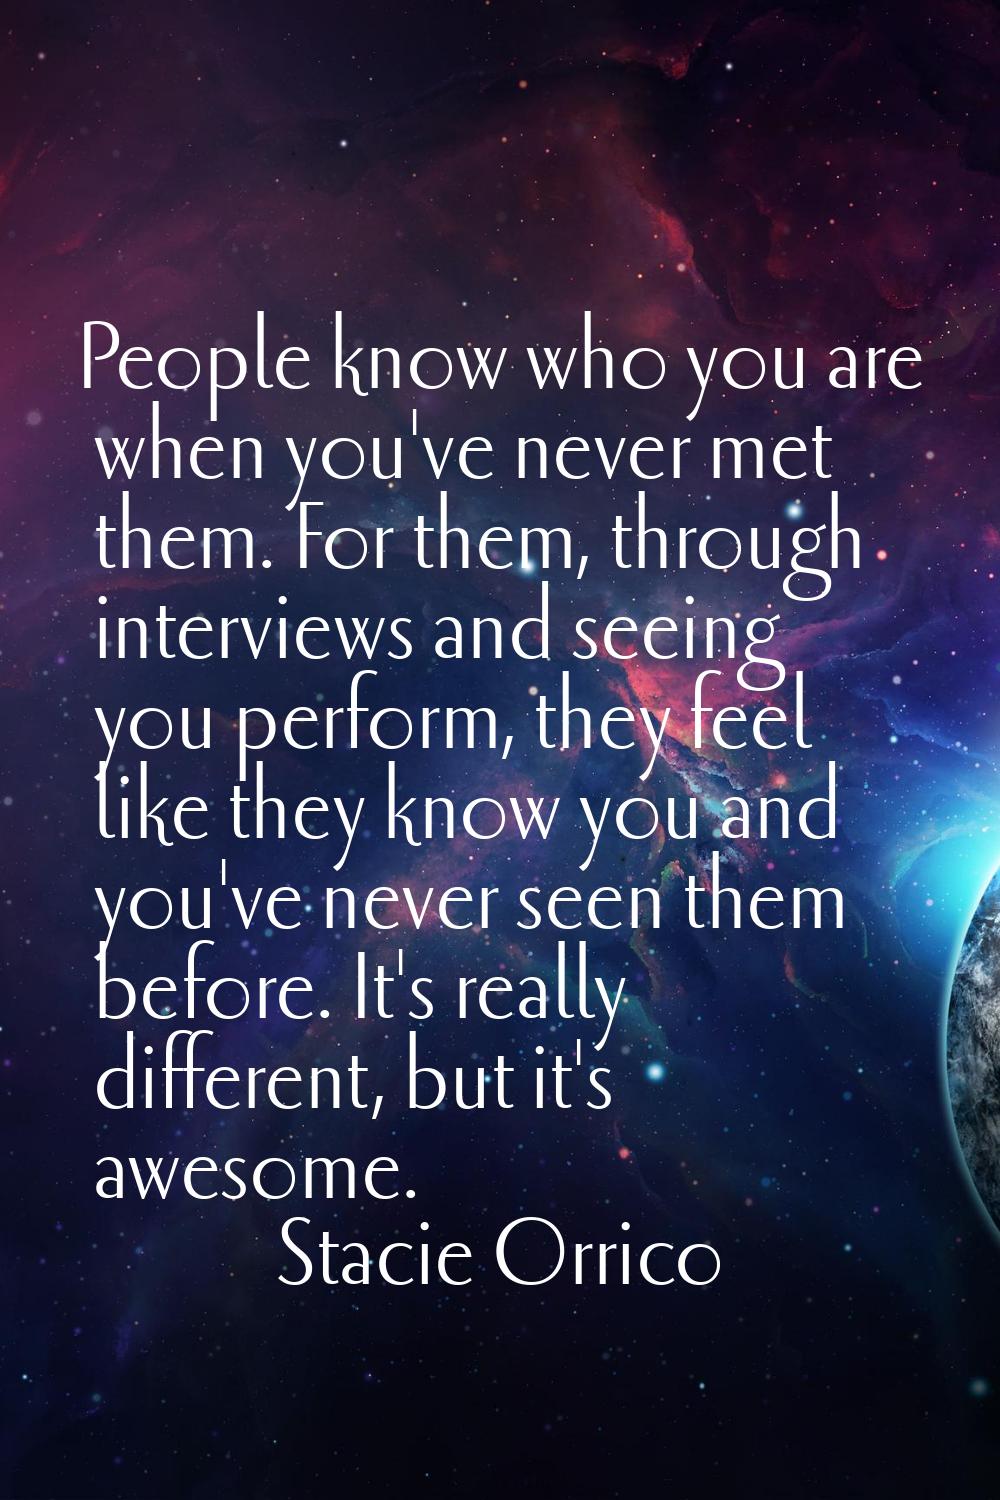 People know who you are when you've never met them. For them, through interviews and seeing you per